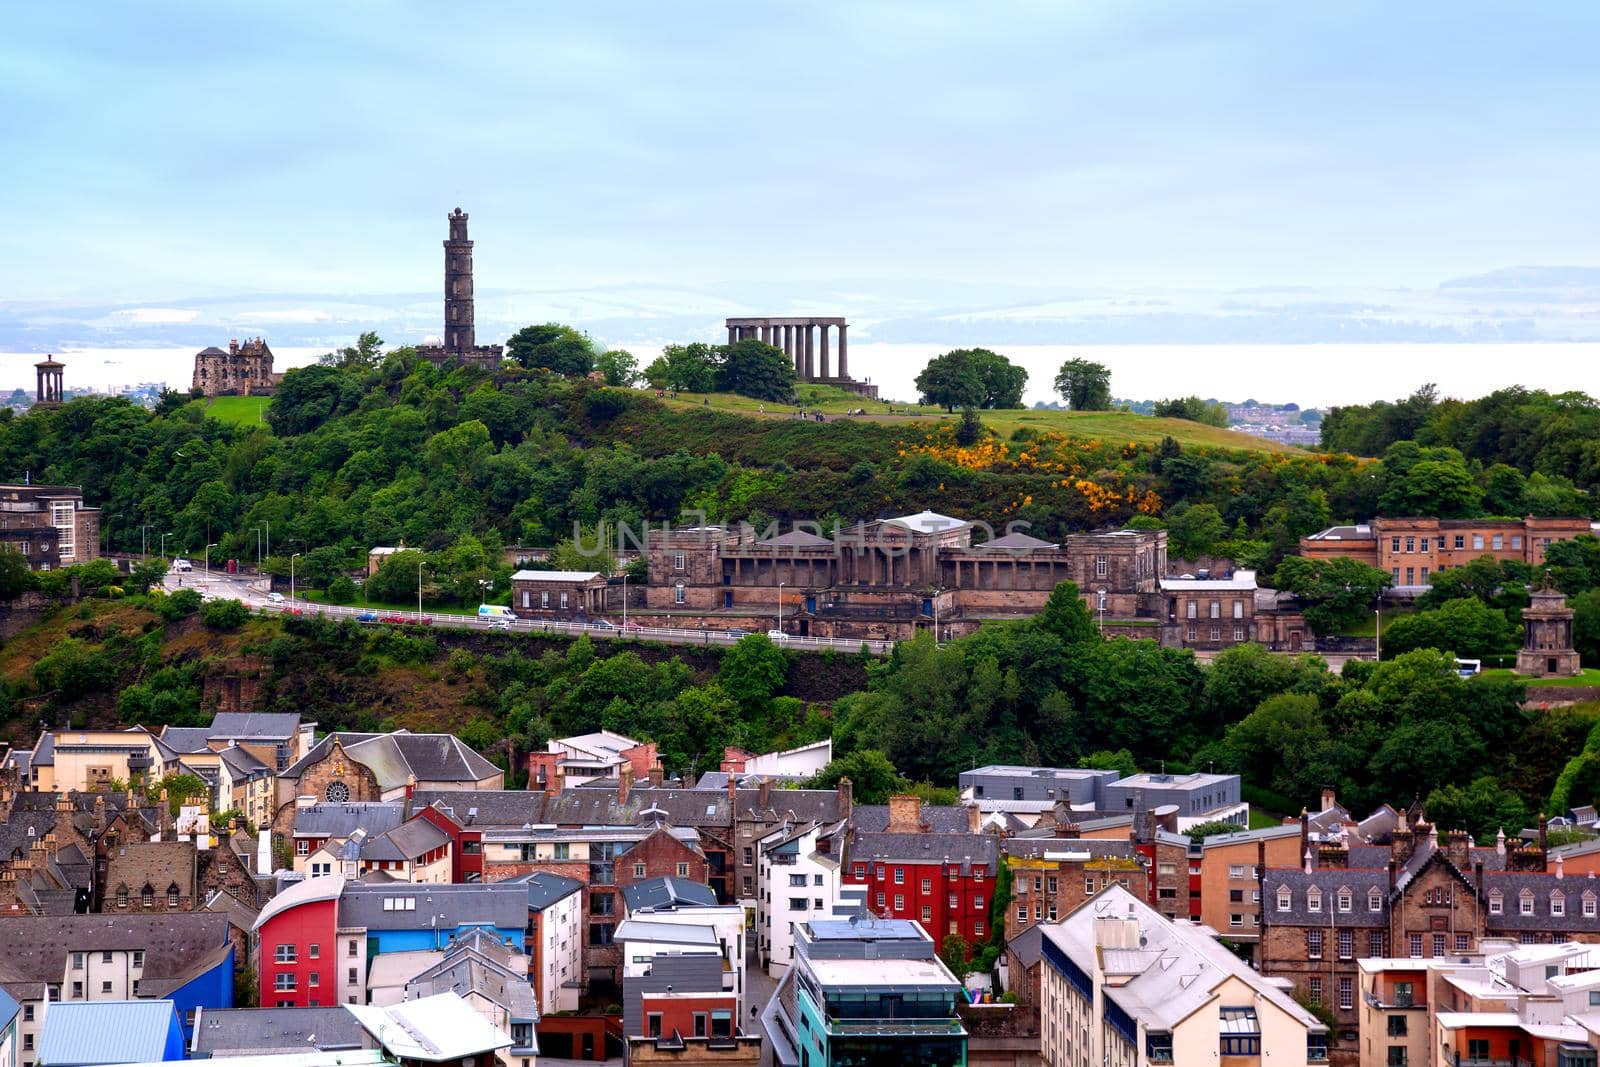 View on Calton Hill and Old Royal High School (also known as New Parliament House) from Holyrood Park, Edinburgh, Scotland, UK